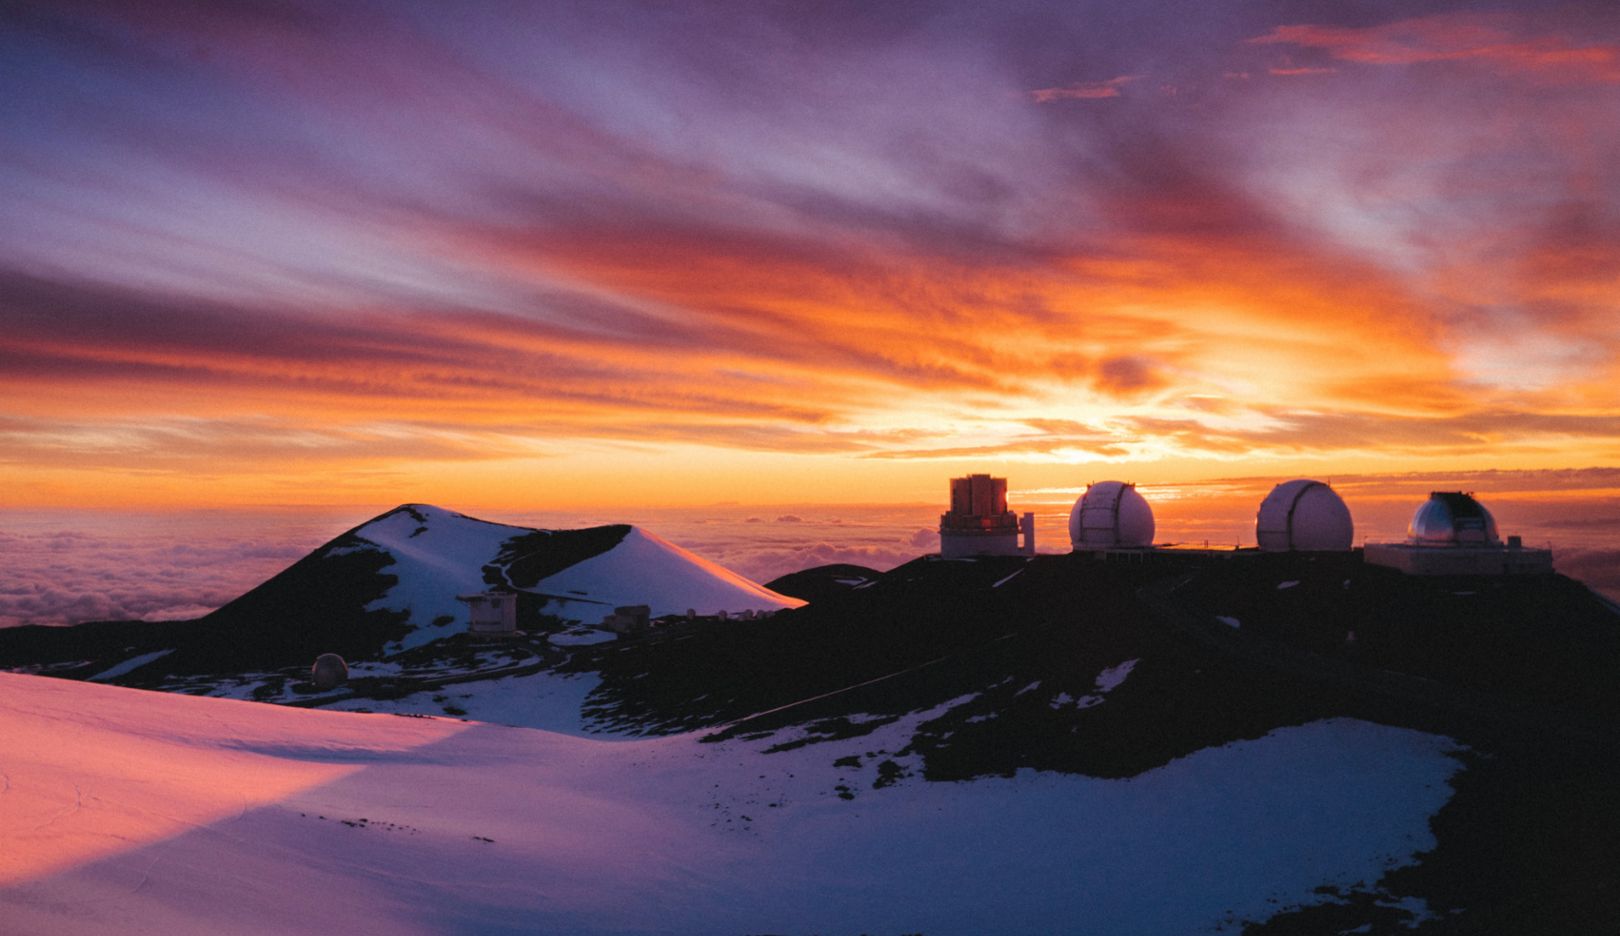 Sunrise at the summit of the 4,200-meter-high volcano. The Mauna Kea Observatory is one of the most important astronomy facilities in the world.